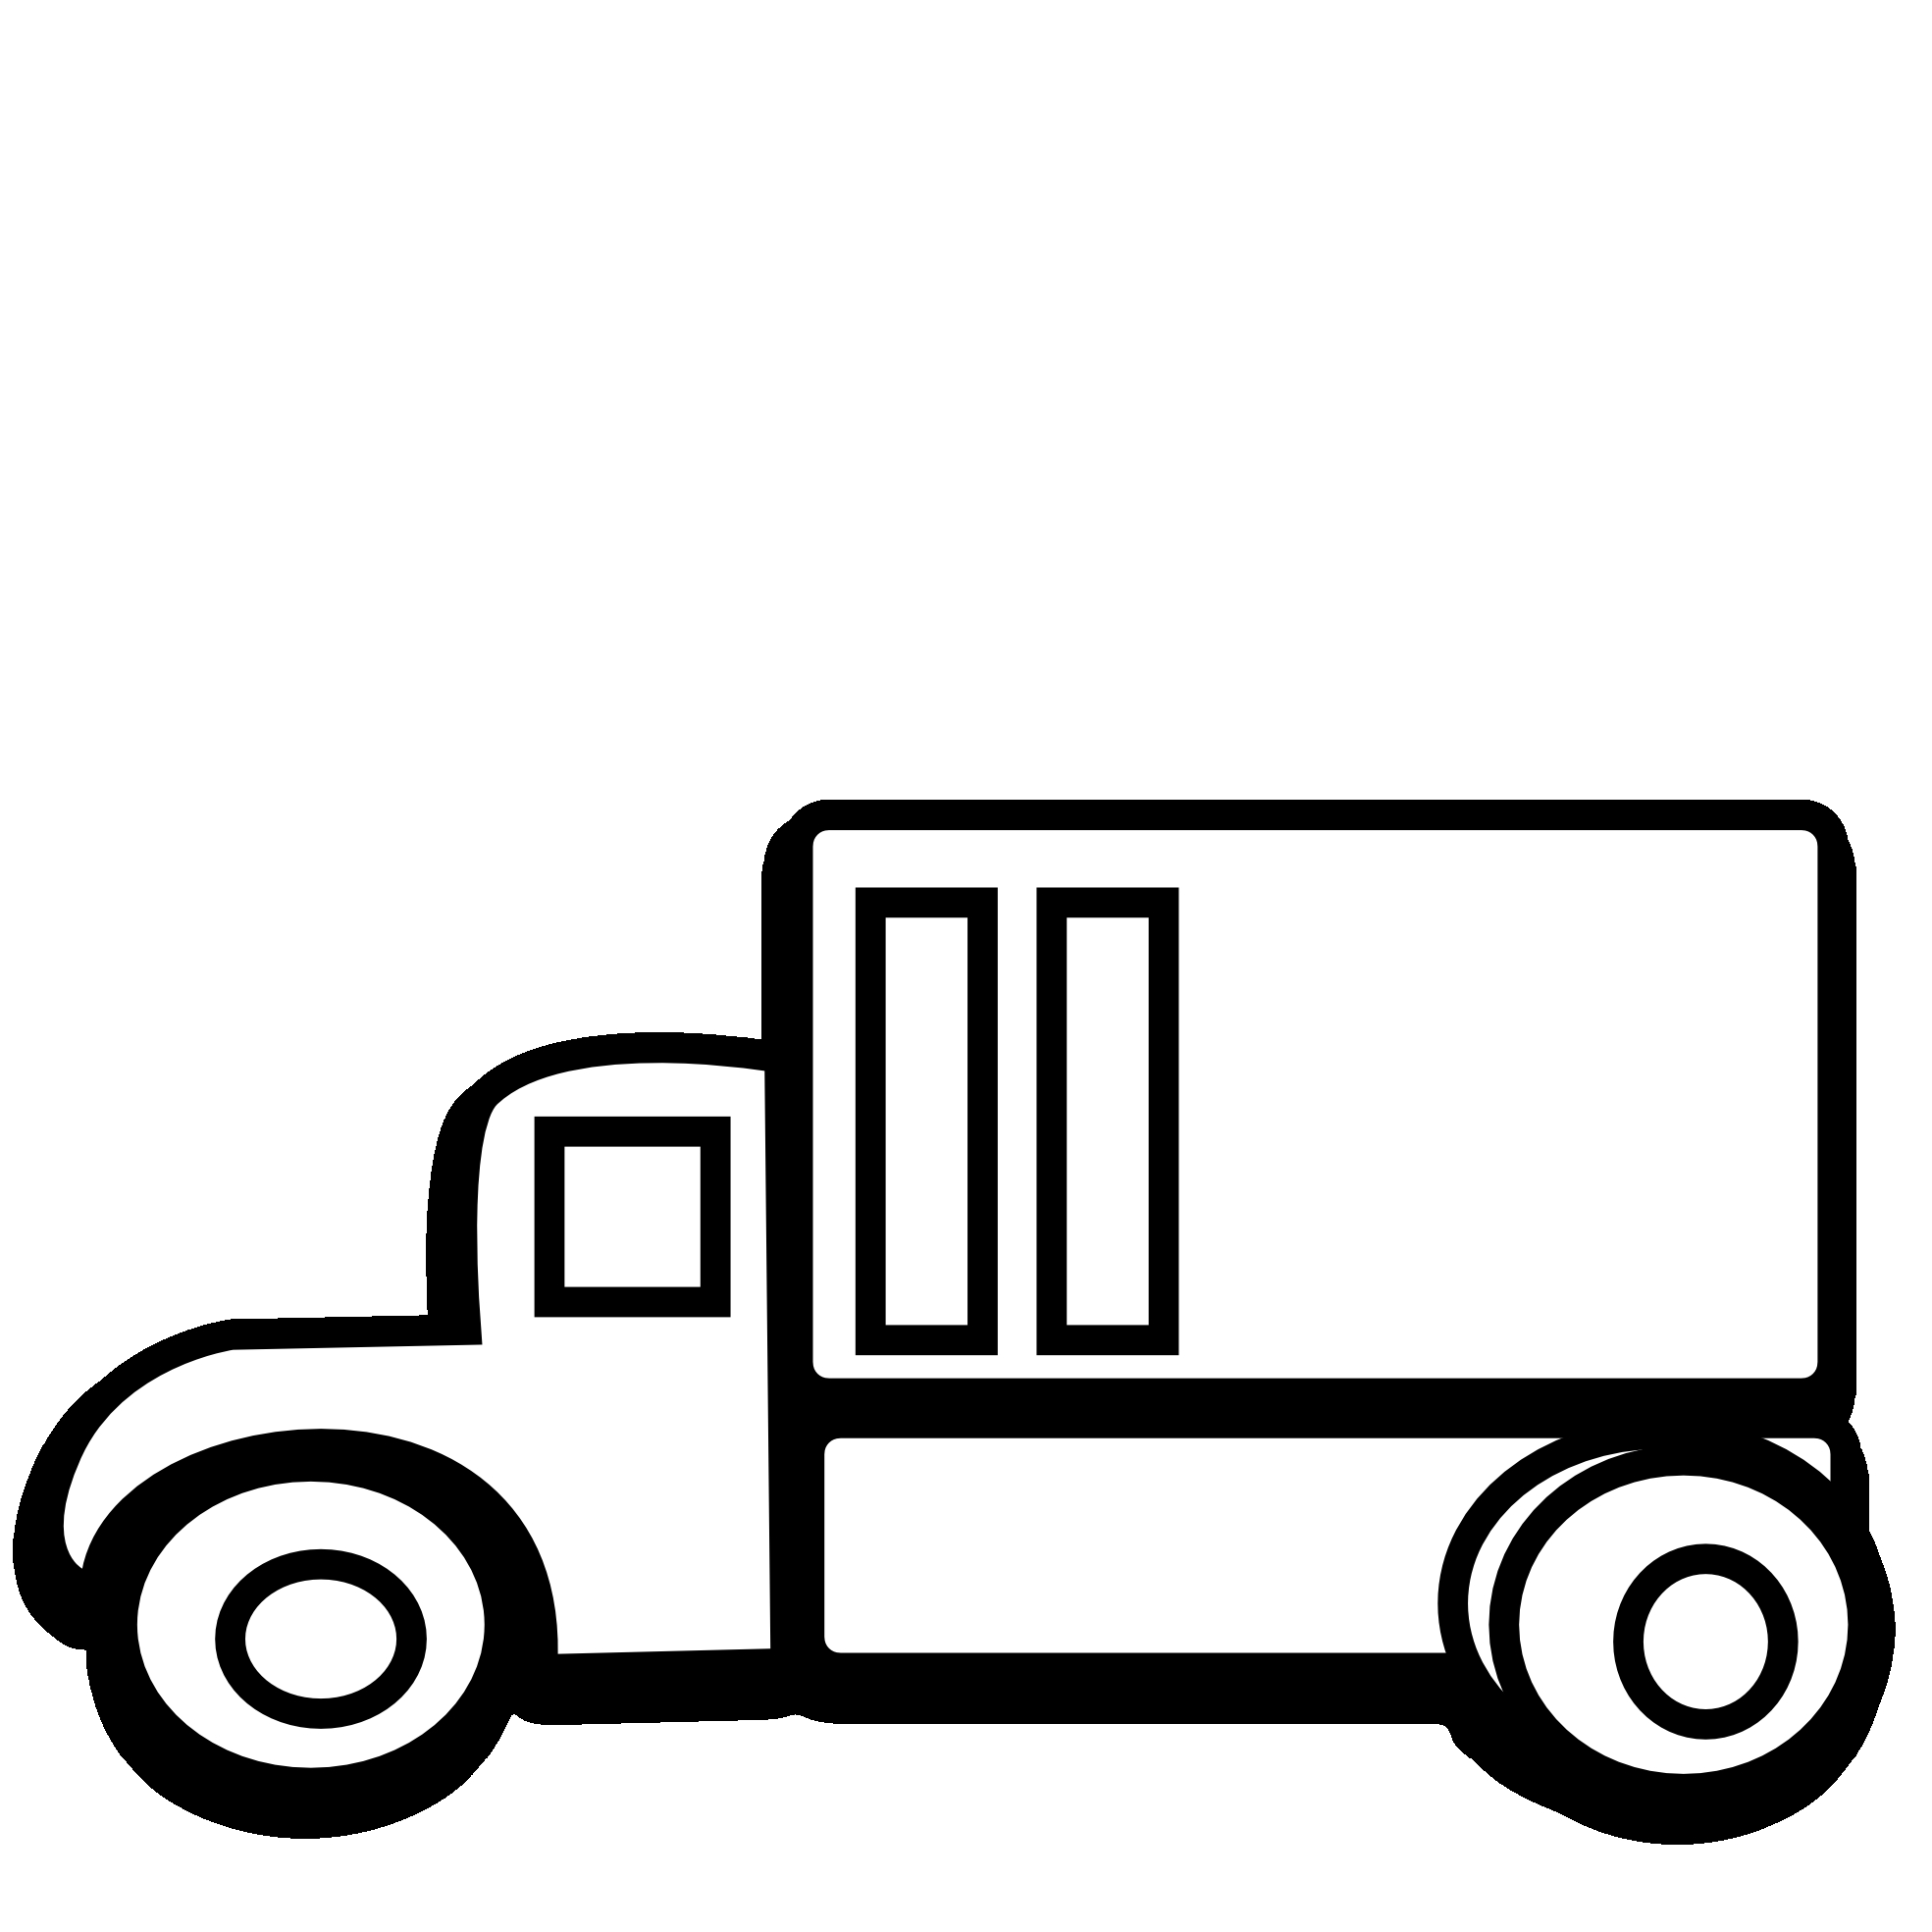 Trucks and cars clipart